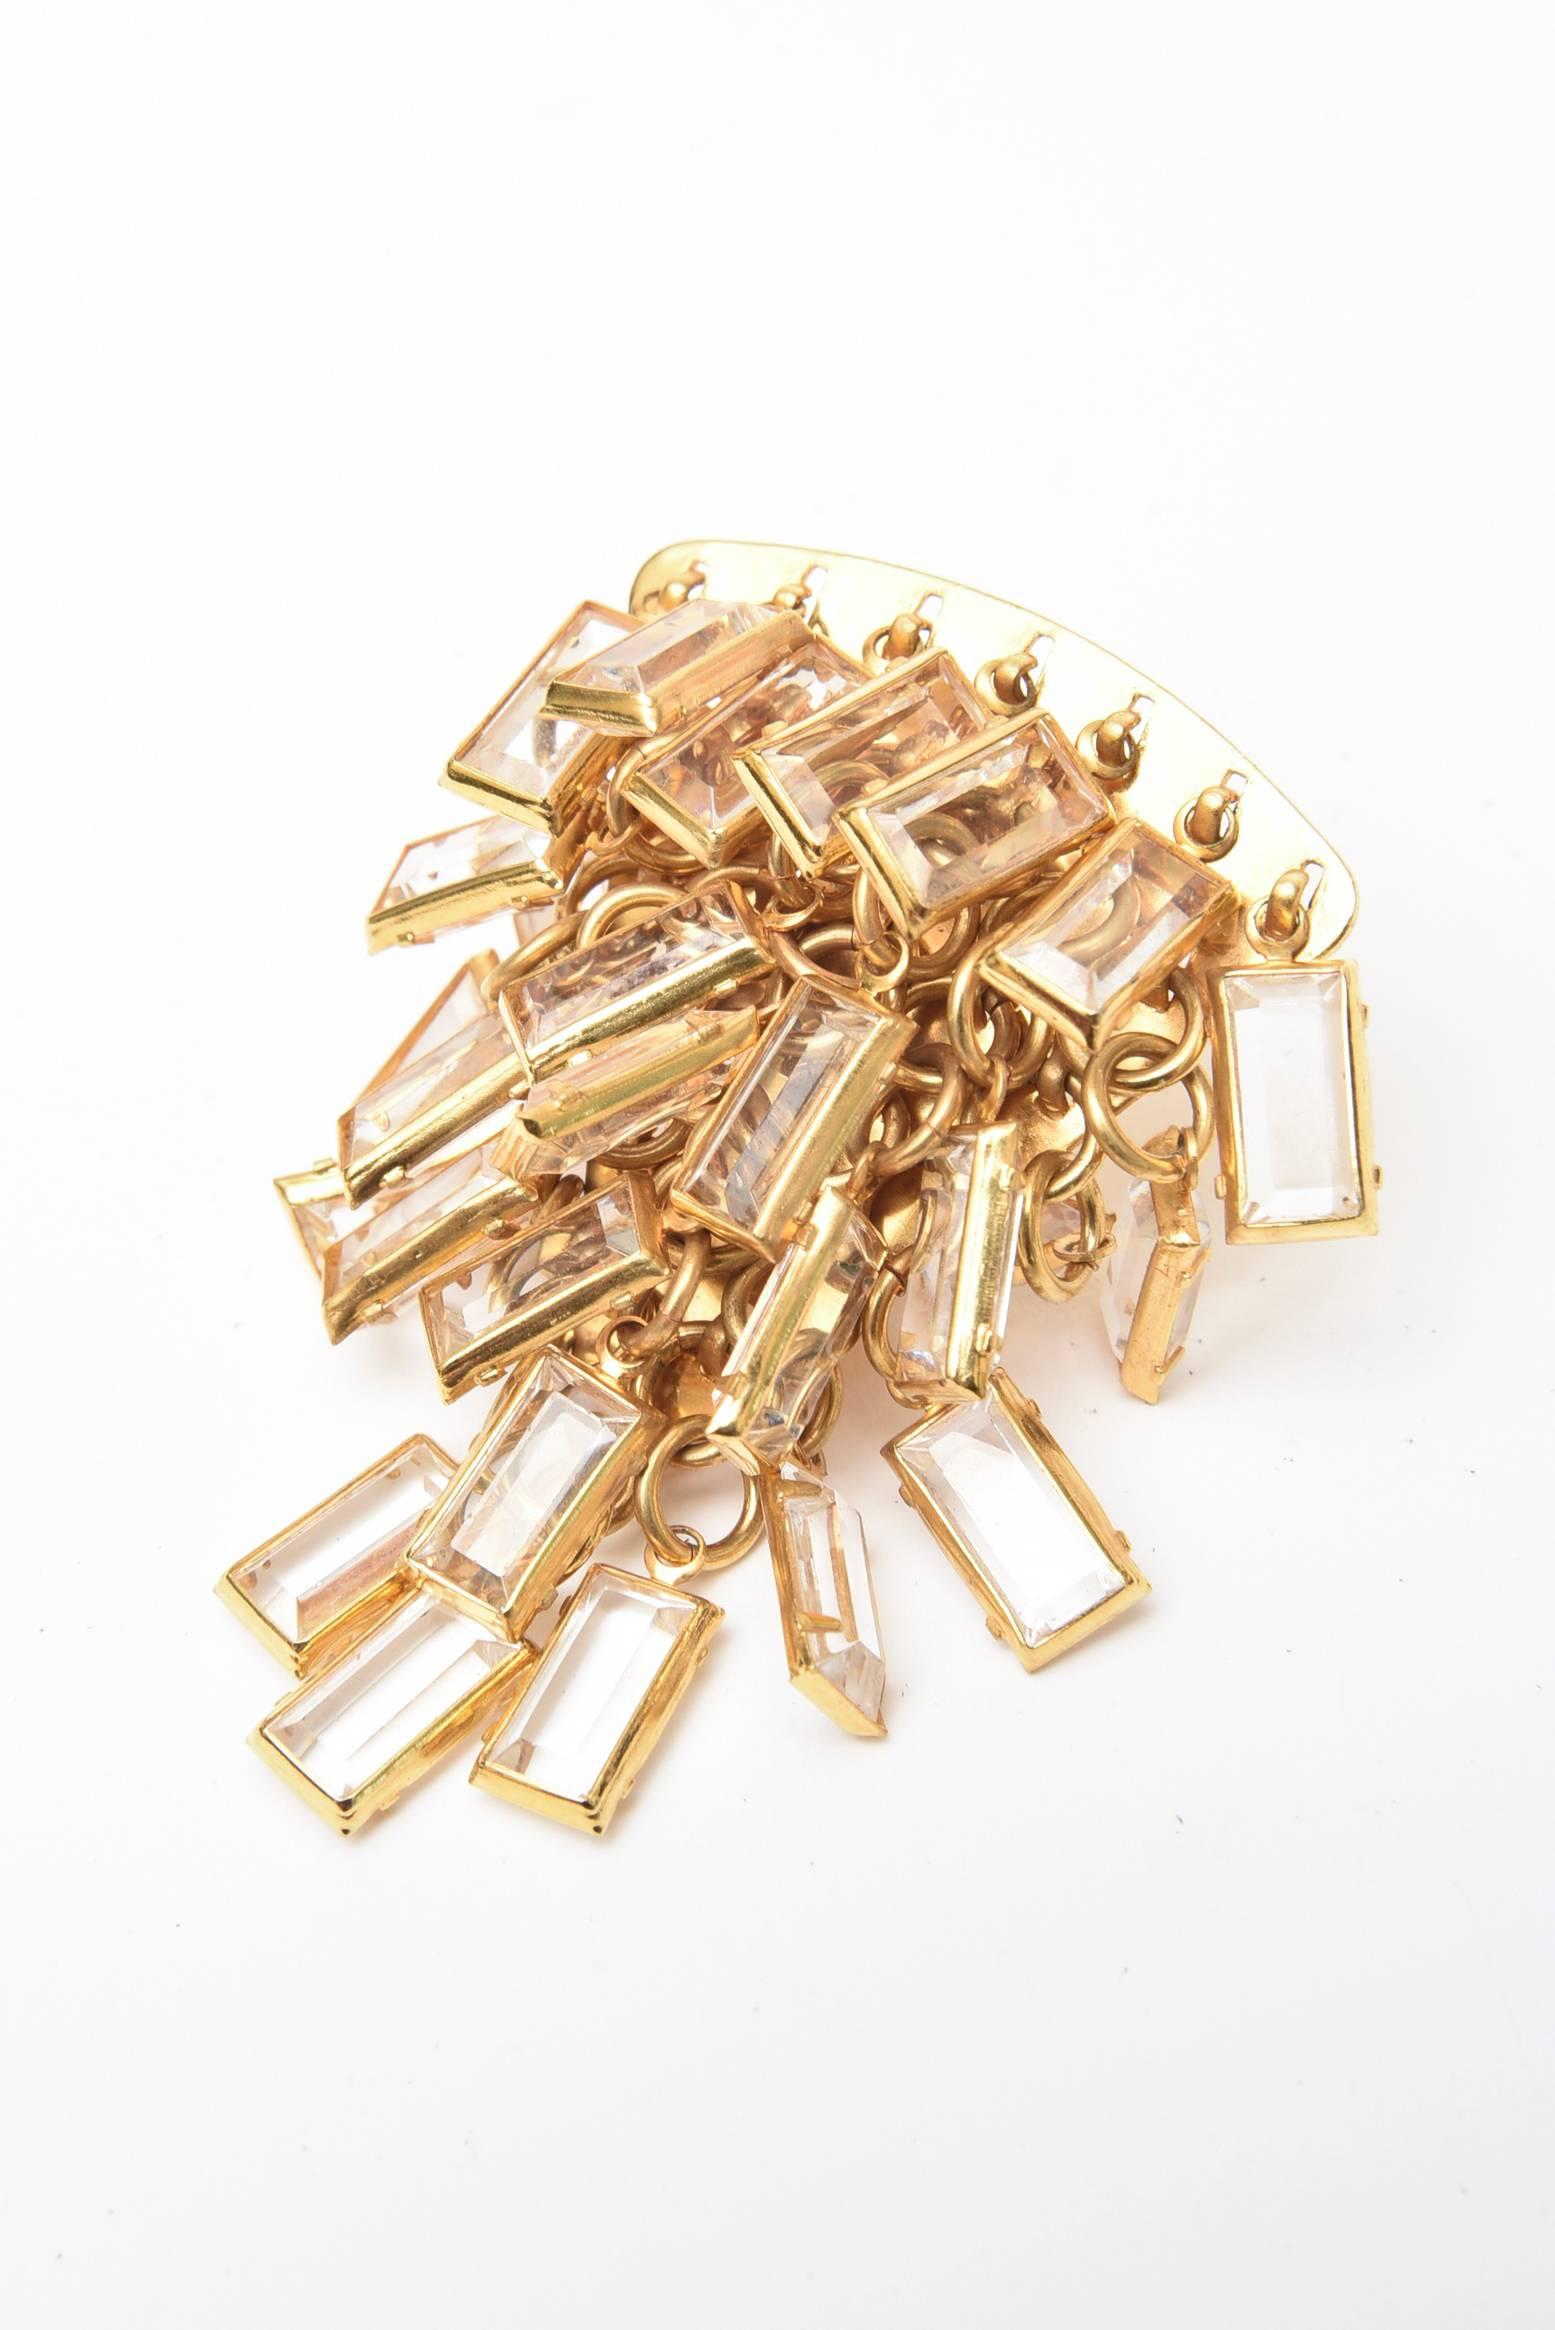  These wonderful and dramatic Italian vintage cascading pair of clip on earrings are composed of tiered small glass chips surrounded by brass. These are perfect for the evening out dinner, cocktail hour and evening attire. Very eye catching on the